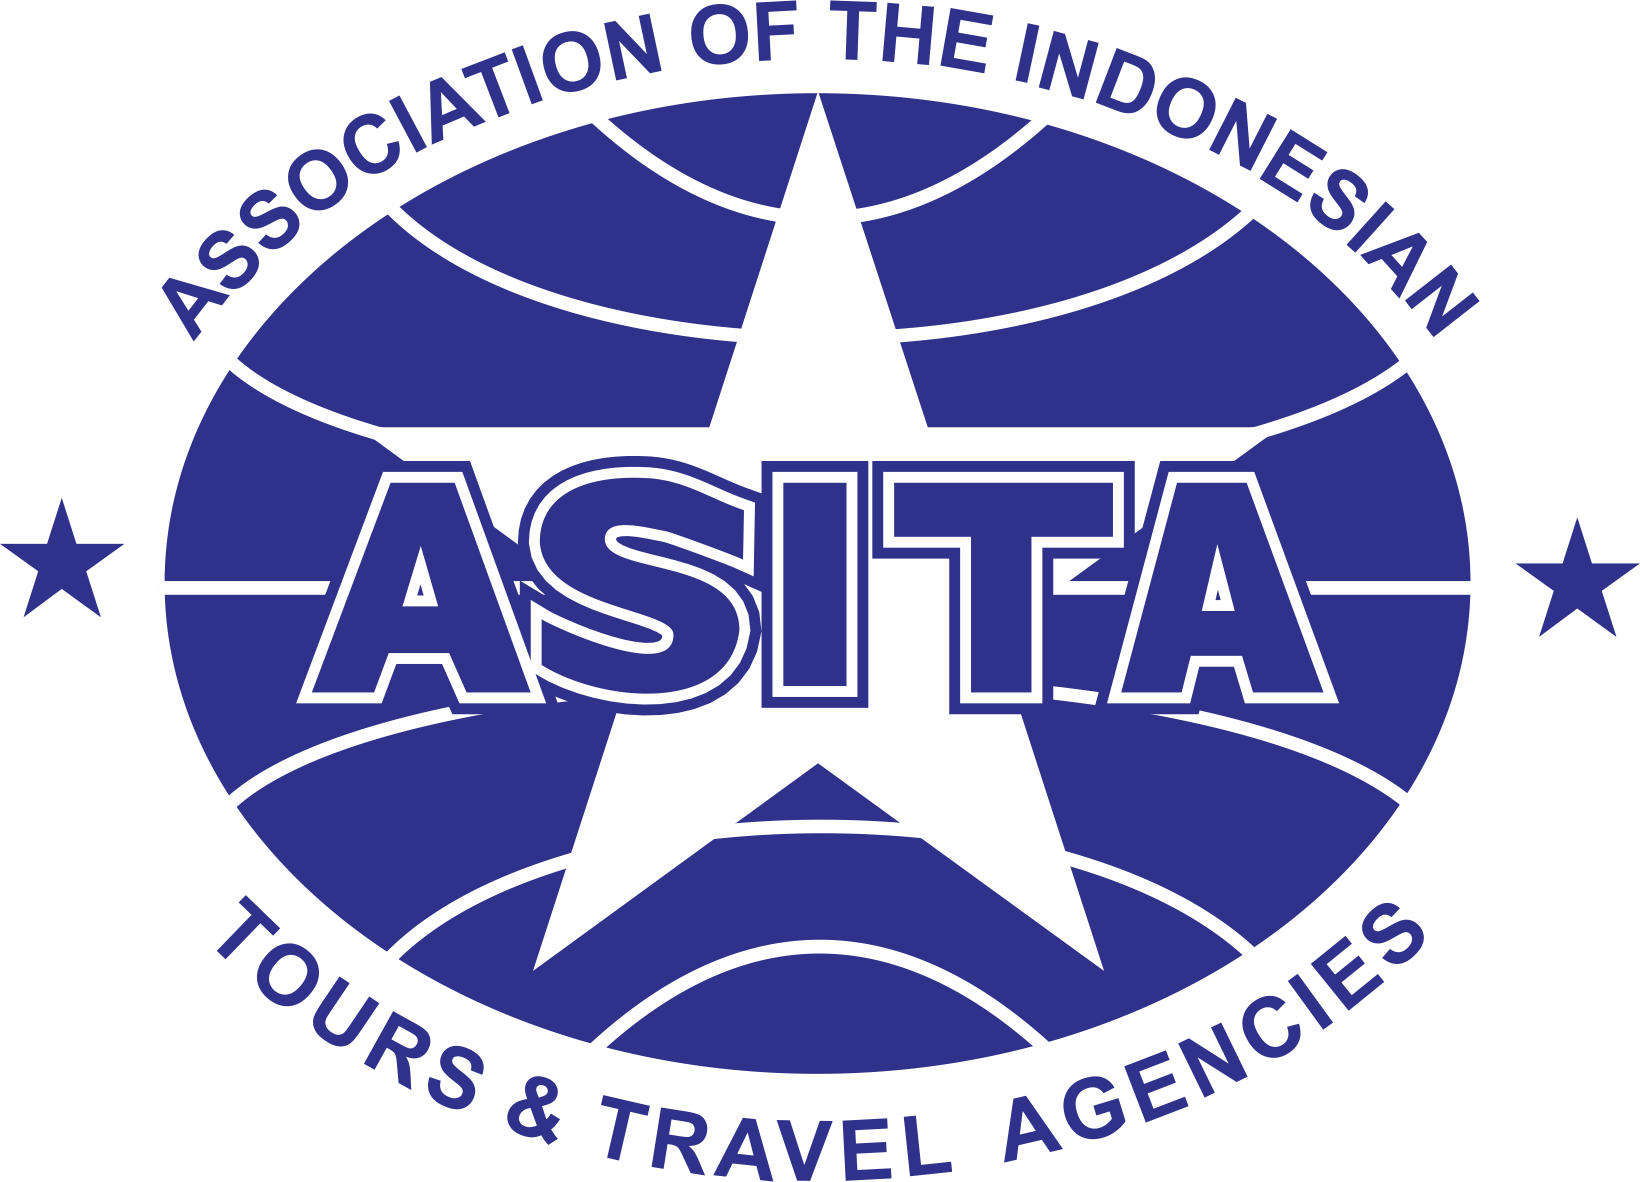 travel agency in bahasa indonesia